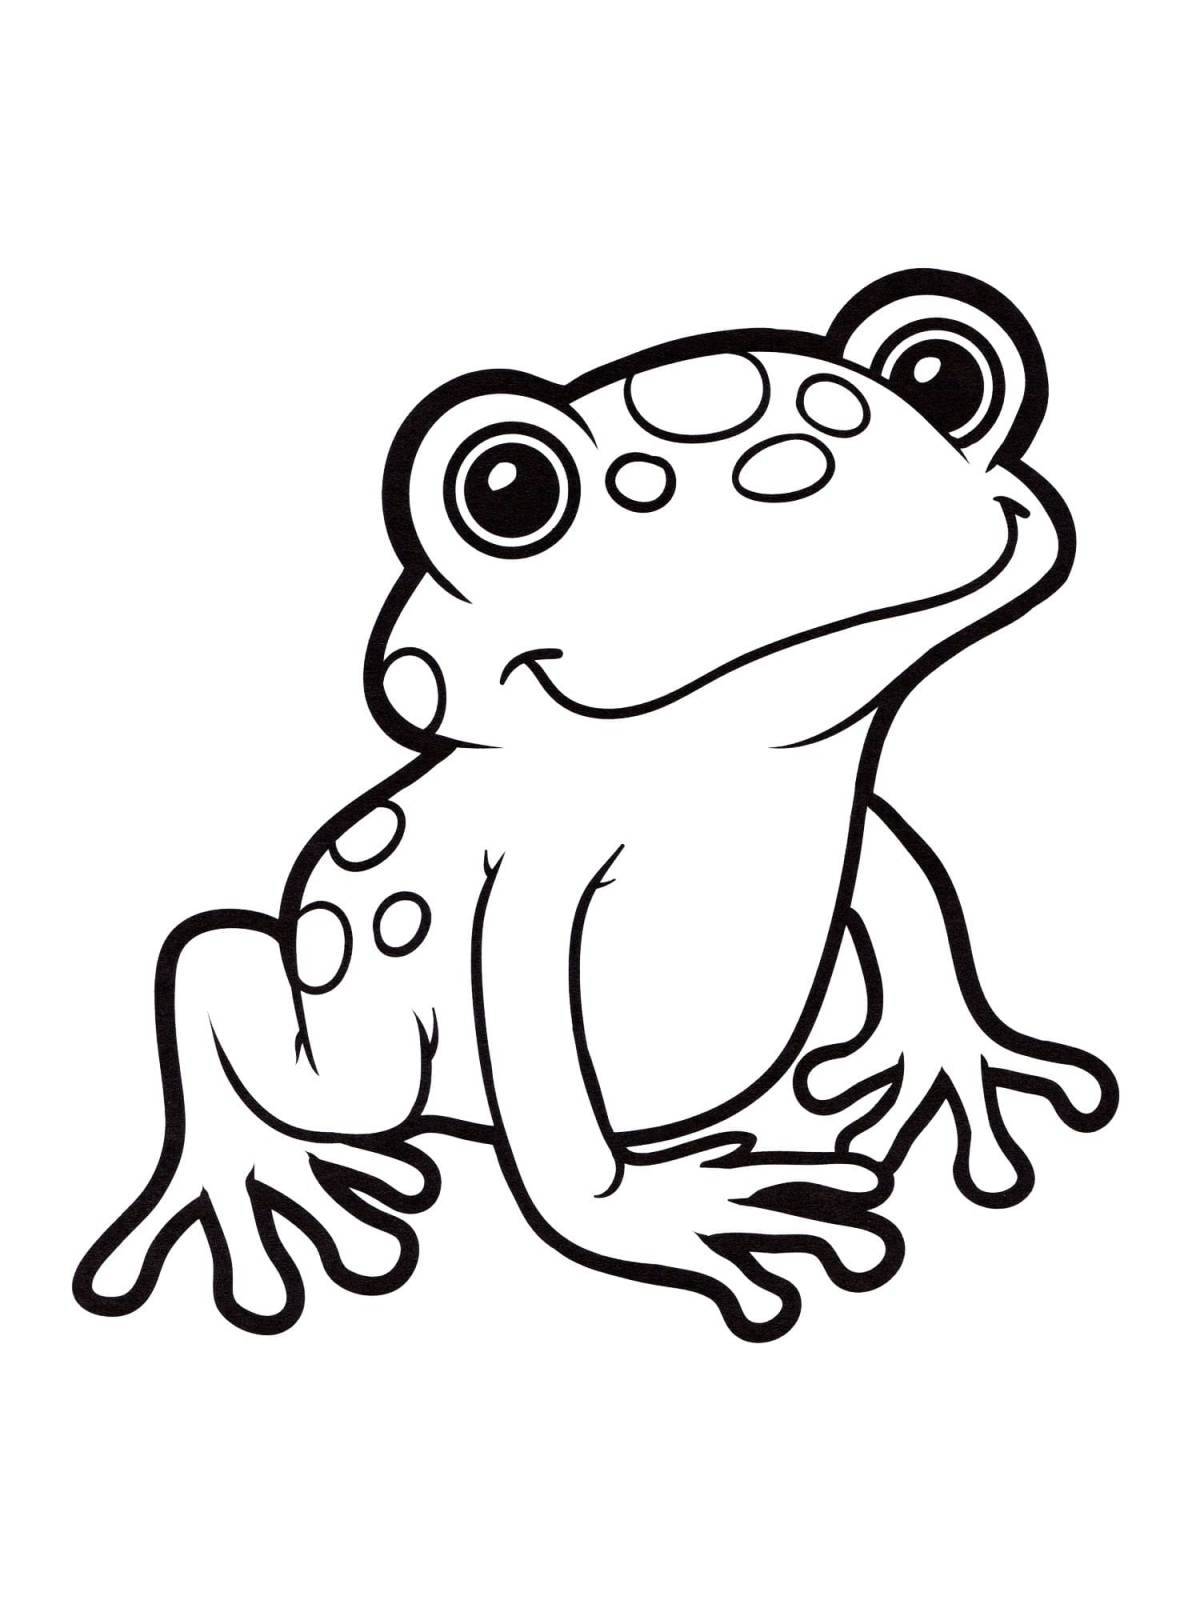 Playful frog coloring book for kids